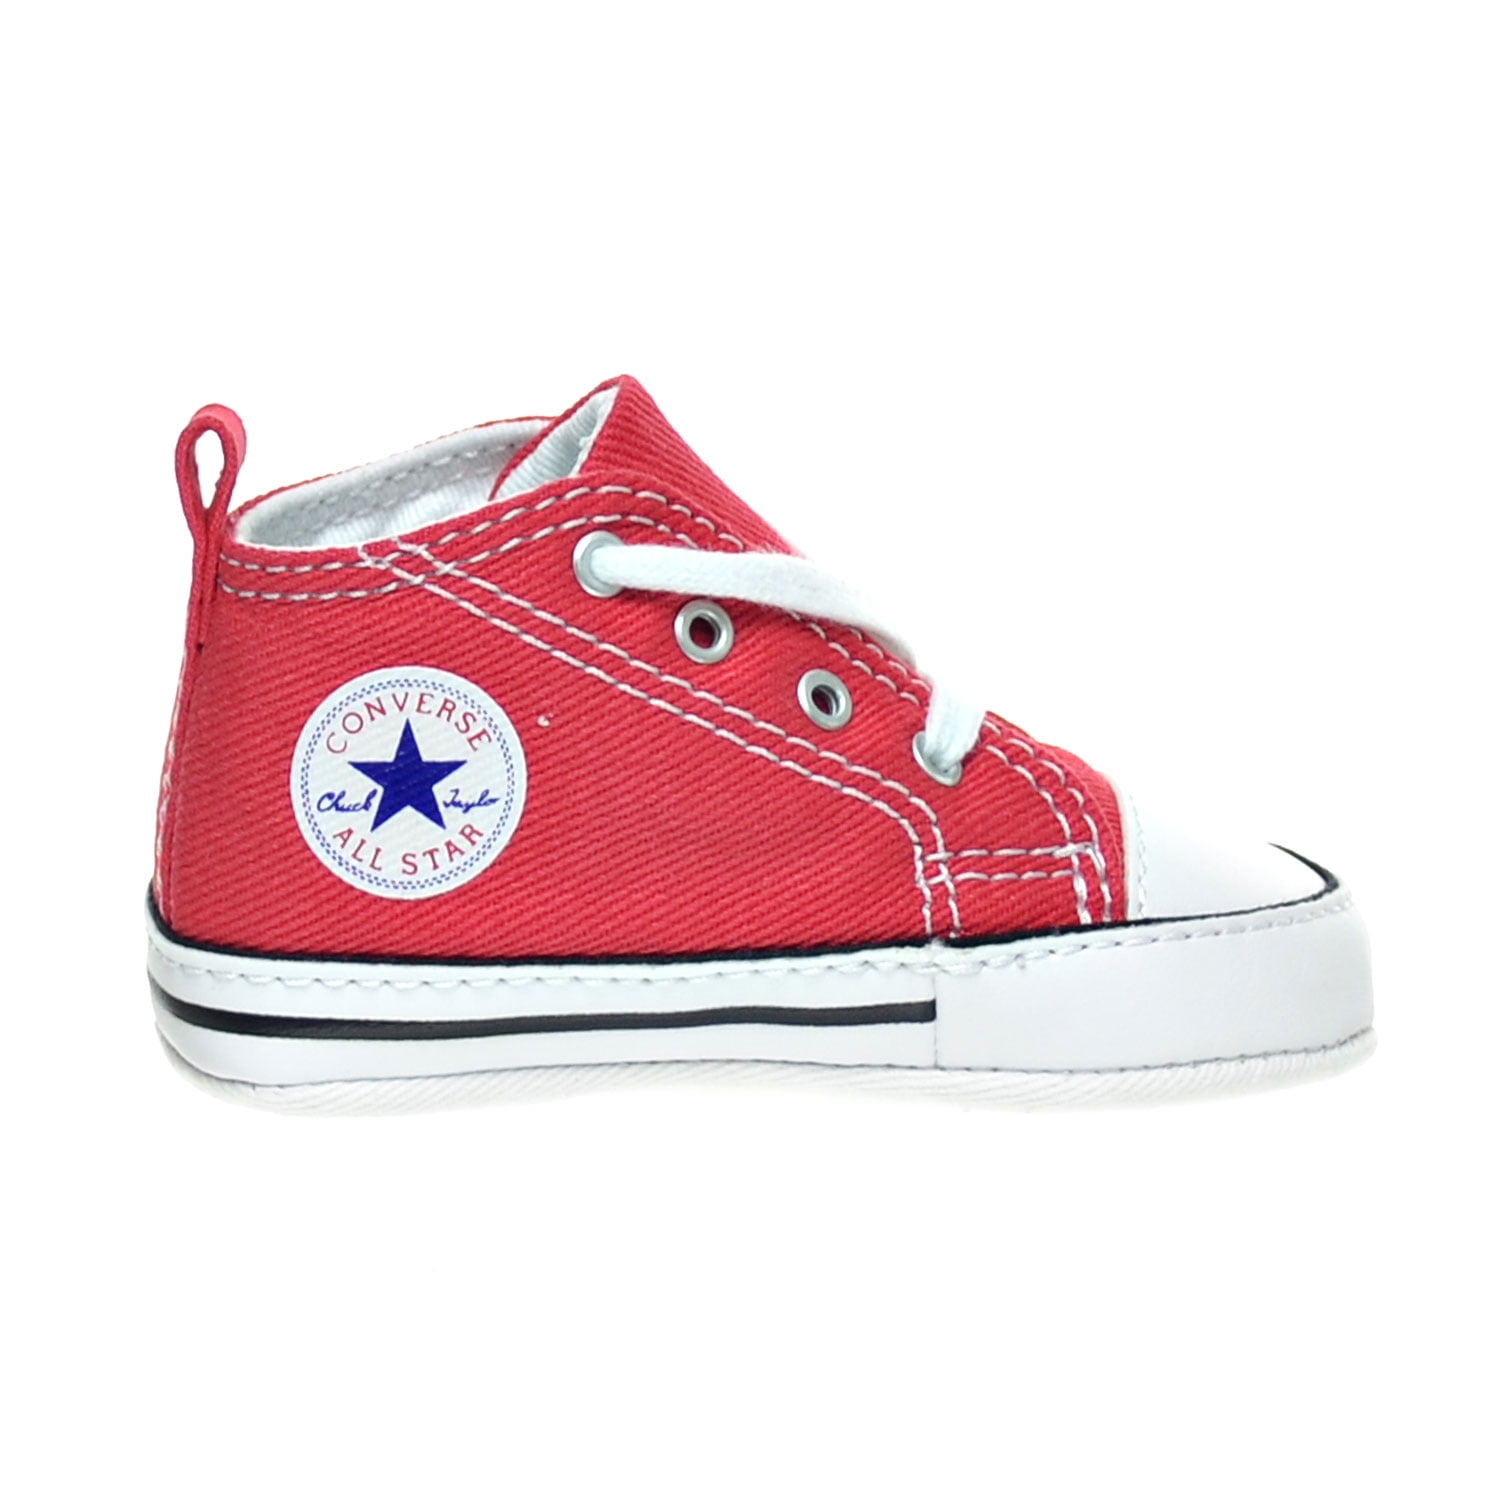 Converse Chuck Taylor First Star Infants/Toddlers Shoes Red/White 88875 ...